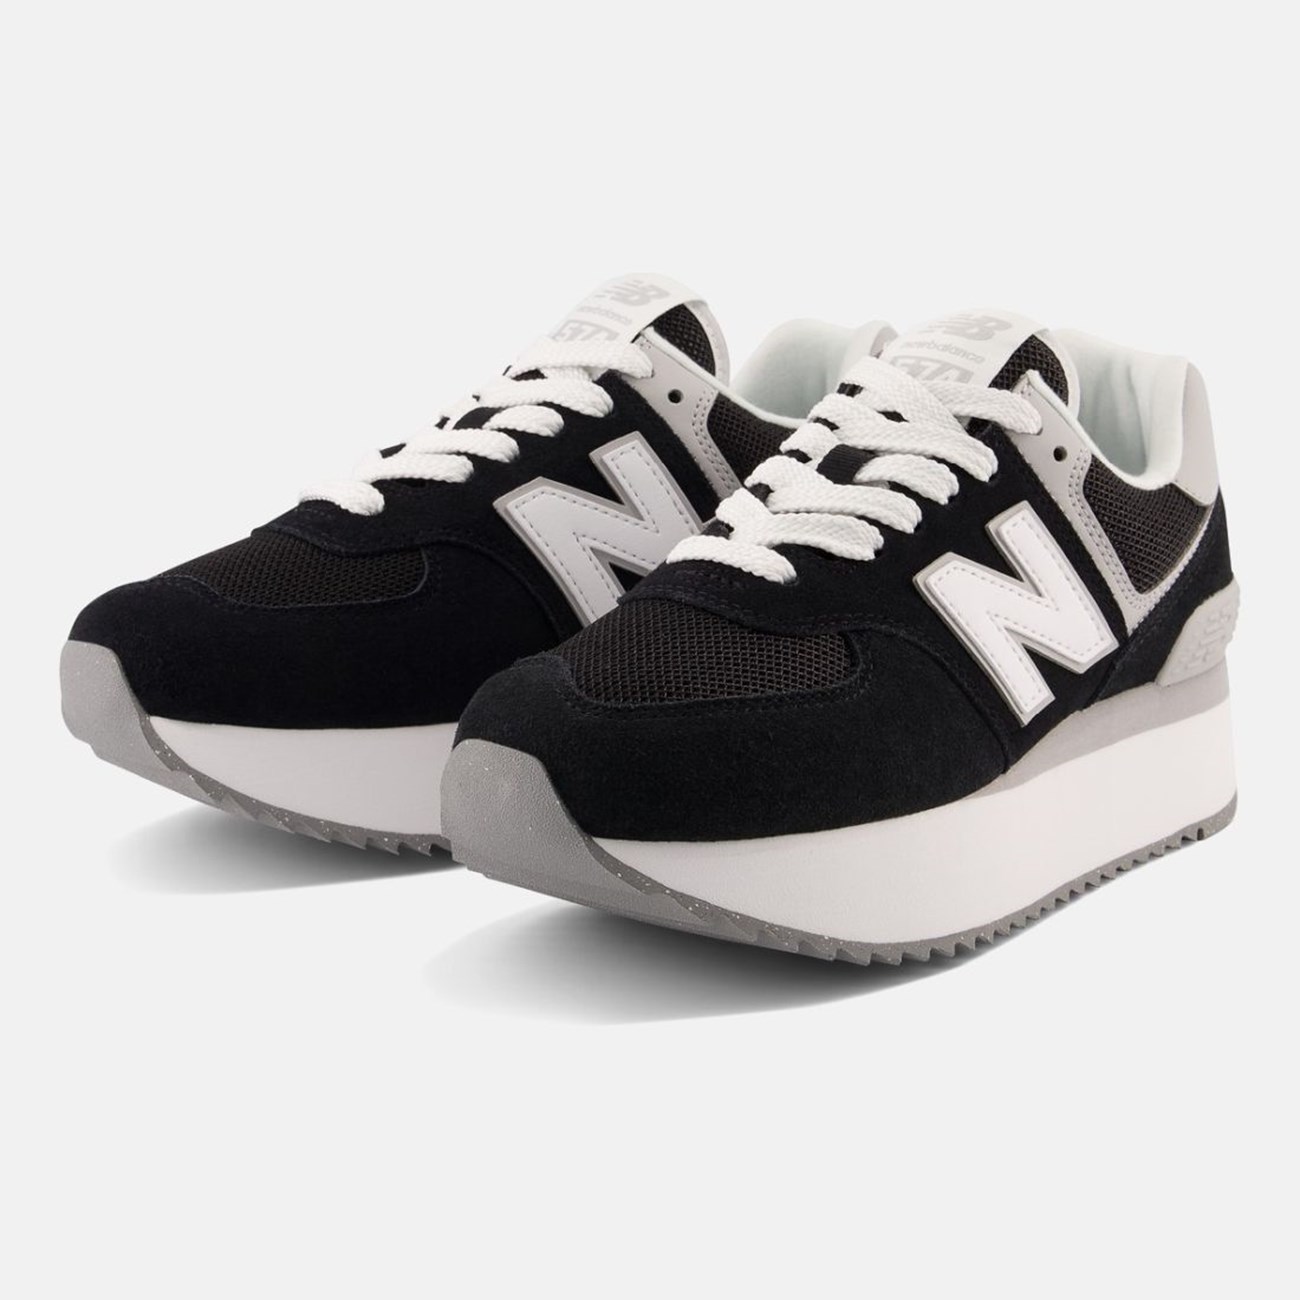 NEW BALANCE Γυναικεία Sneakers 574 WL574ZSA - The Athlete's Foot